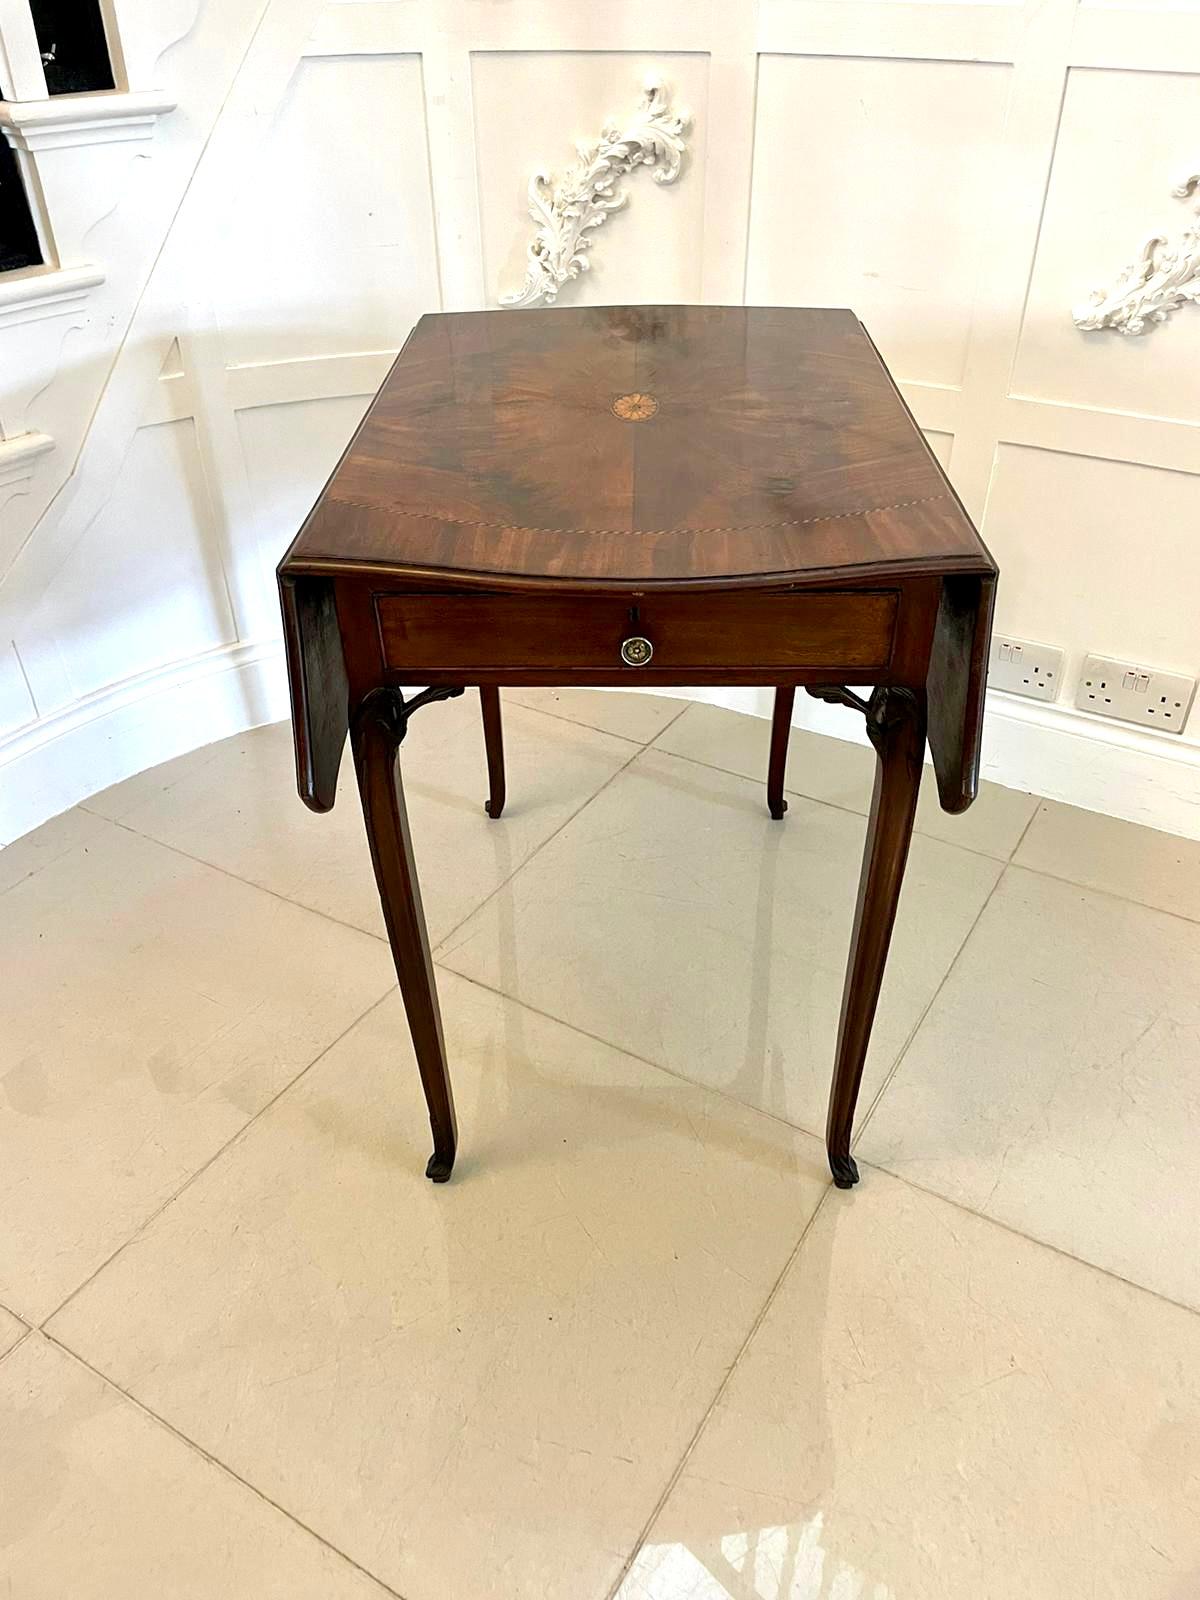 Antique 18th century George III quality mahogany inlaid butterfly Pembroke table having a quality mahogany inlaid butterfly shaped top with a moulded edge, one drawer to the frieze and standing on elegant shaped cabriole legs with scroll feet 

A